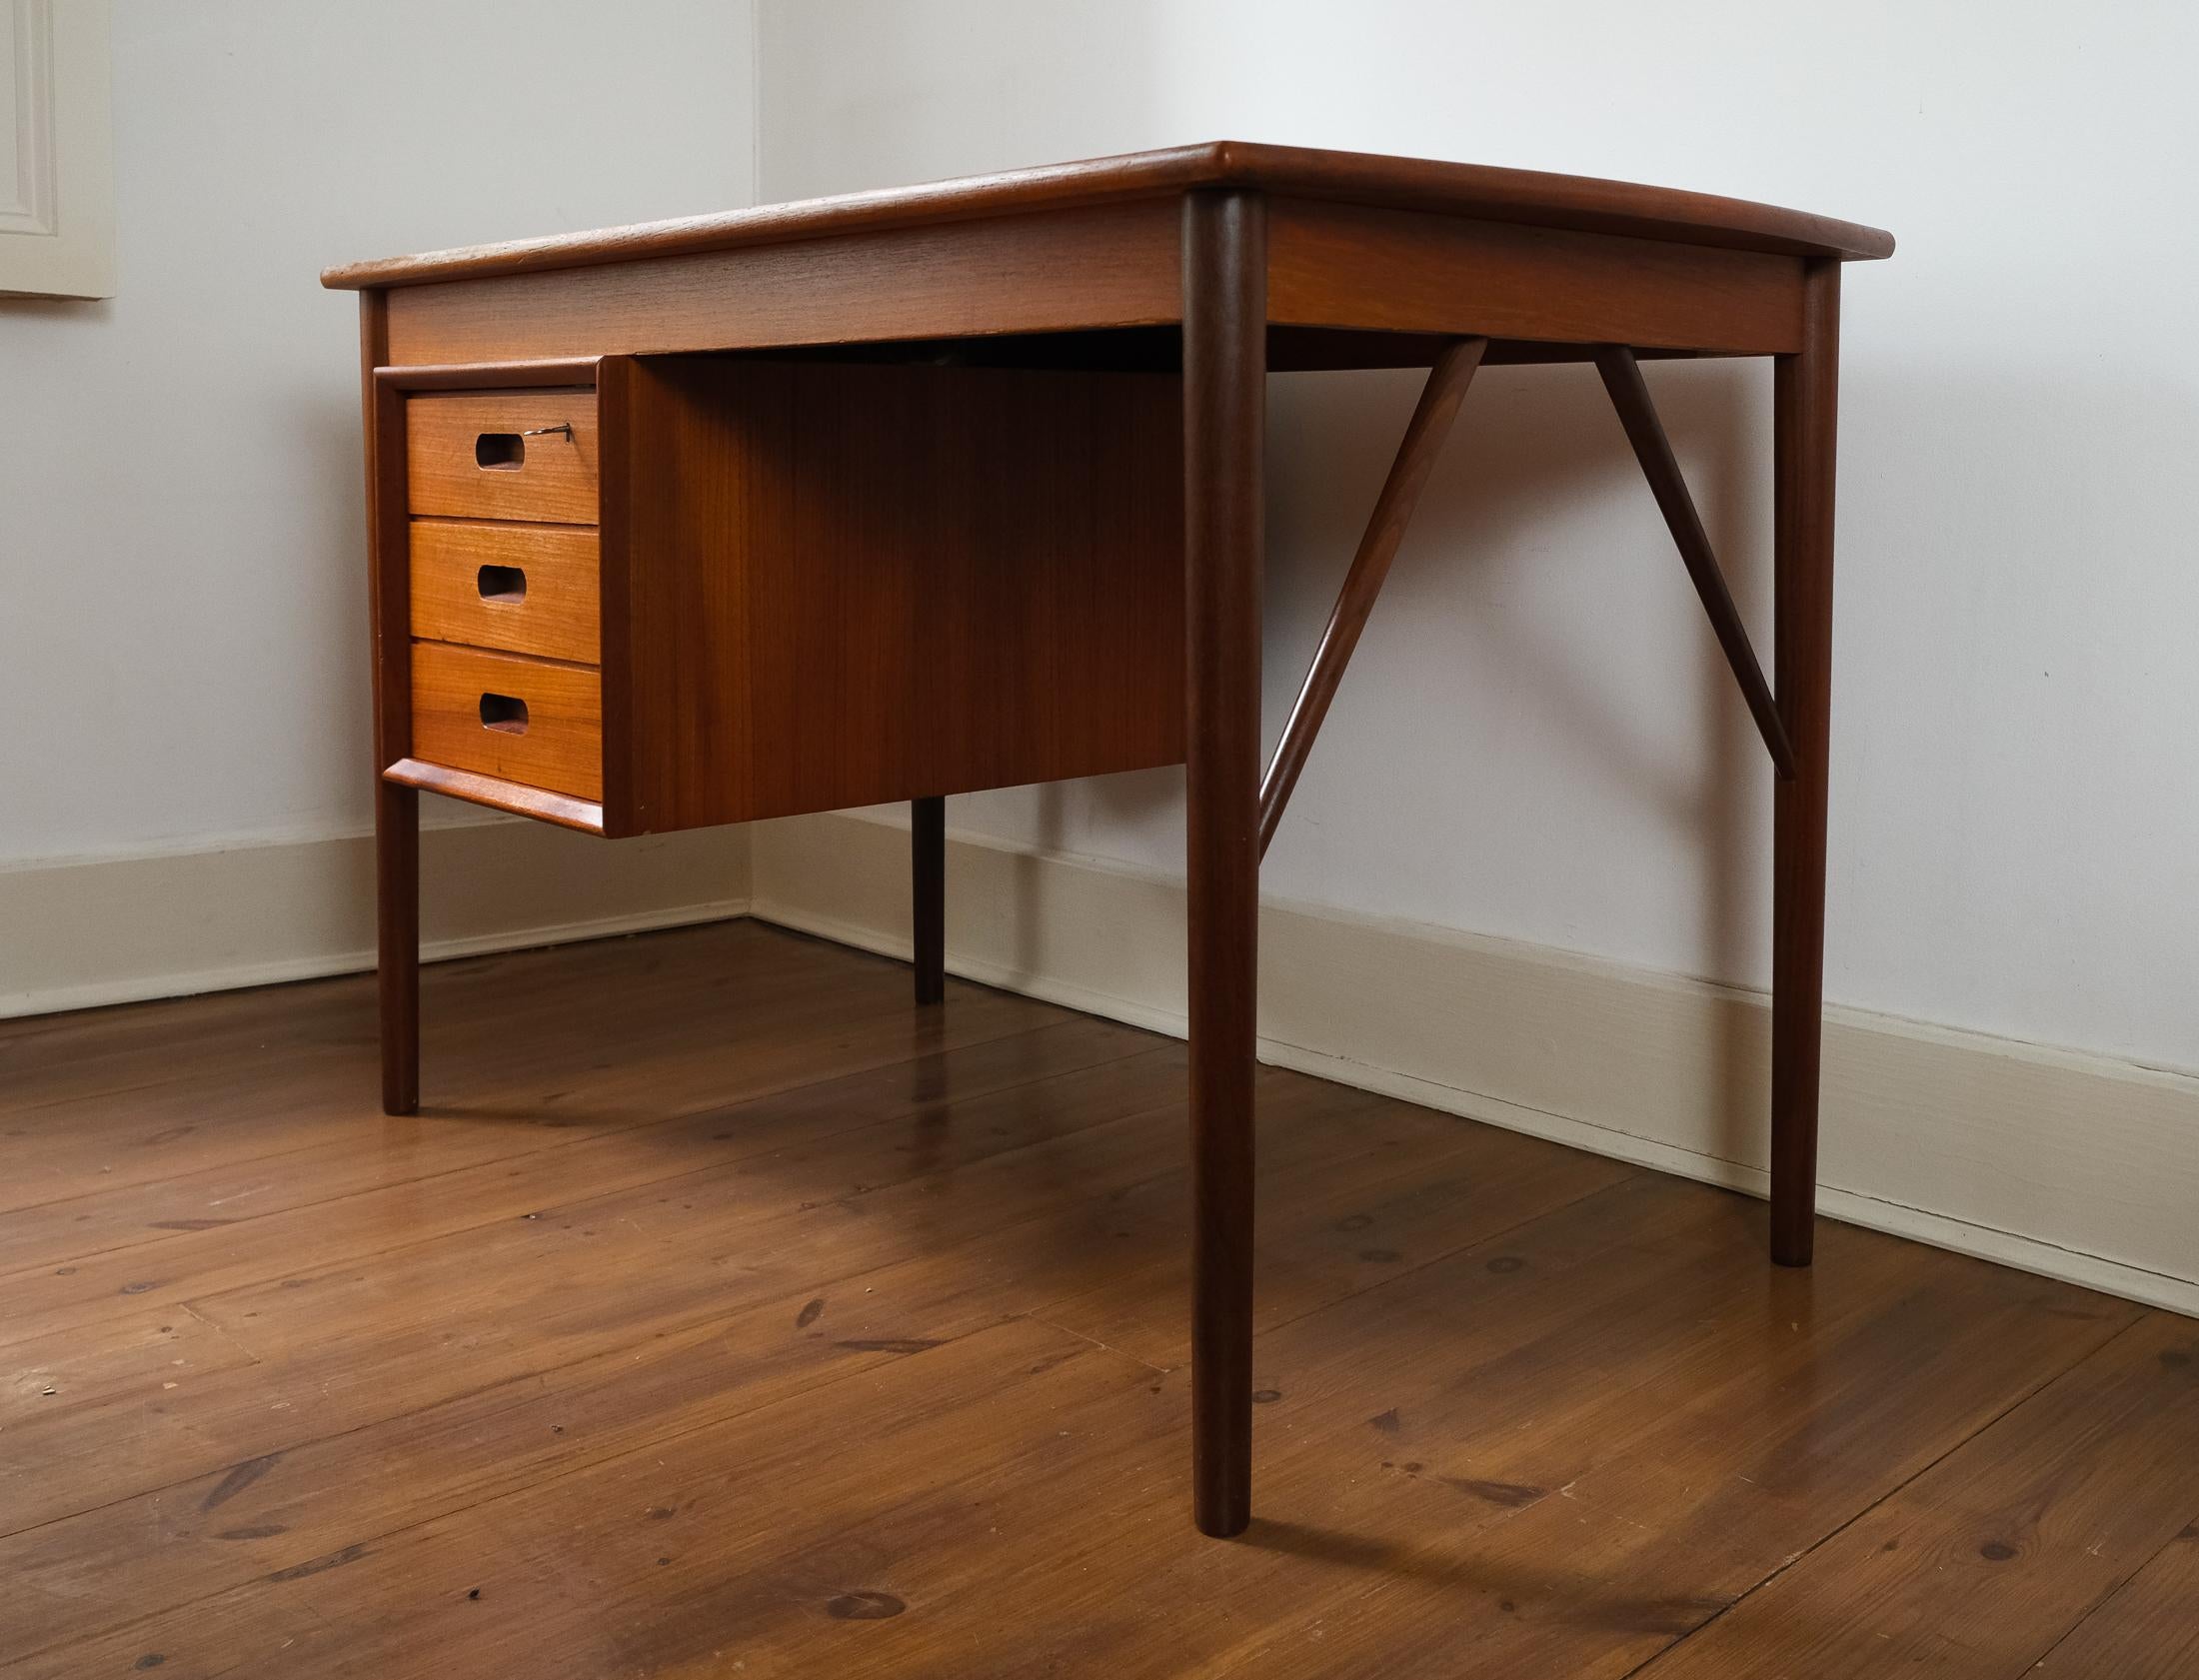 For sale is a stunning Mid-Century Modernist Danish Teak Desk designed by Erik Buch for Oddense Maskinsnedkeri AS, circa 1960s.

The desk, which comprises three drawers, one with a lock & key, and a display shelf on the front side, is in good